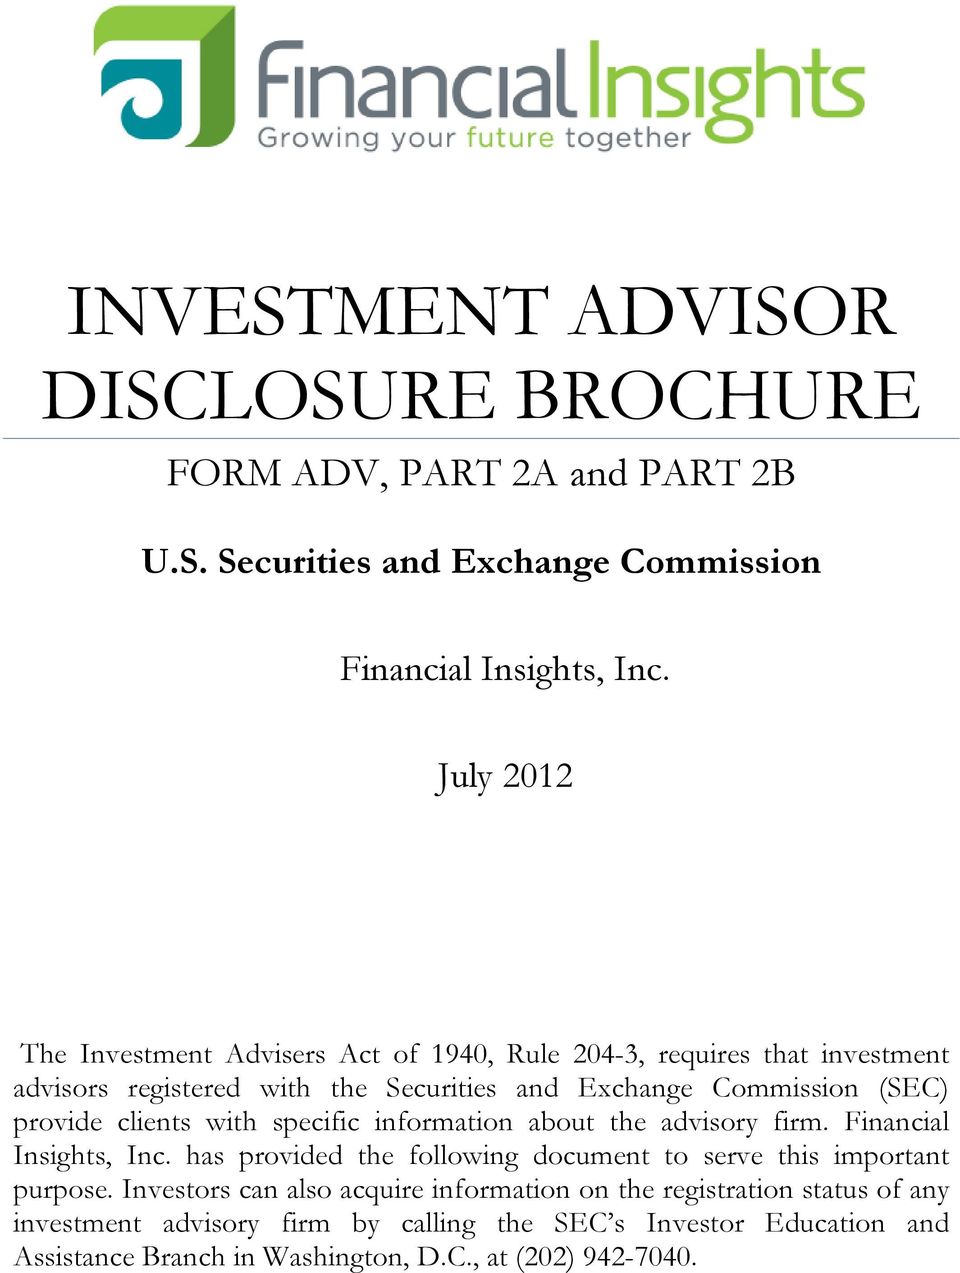 clients with specific information about the advisory firm. Financial Insights, Inc. has provided the following document to serve this important purpose.